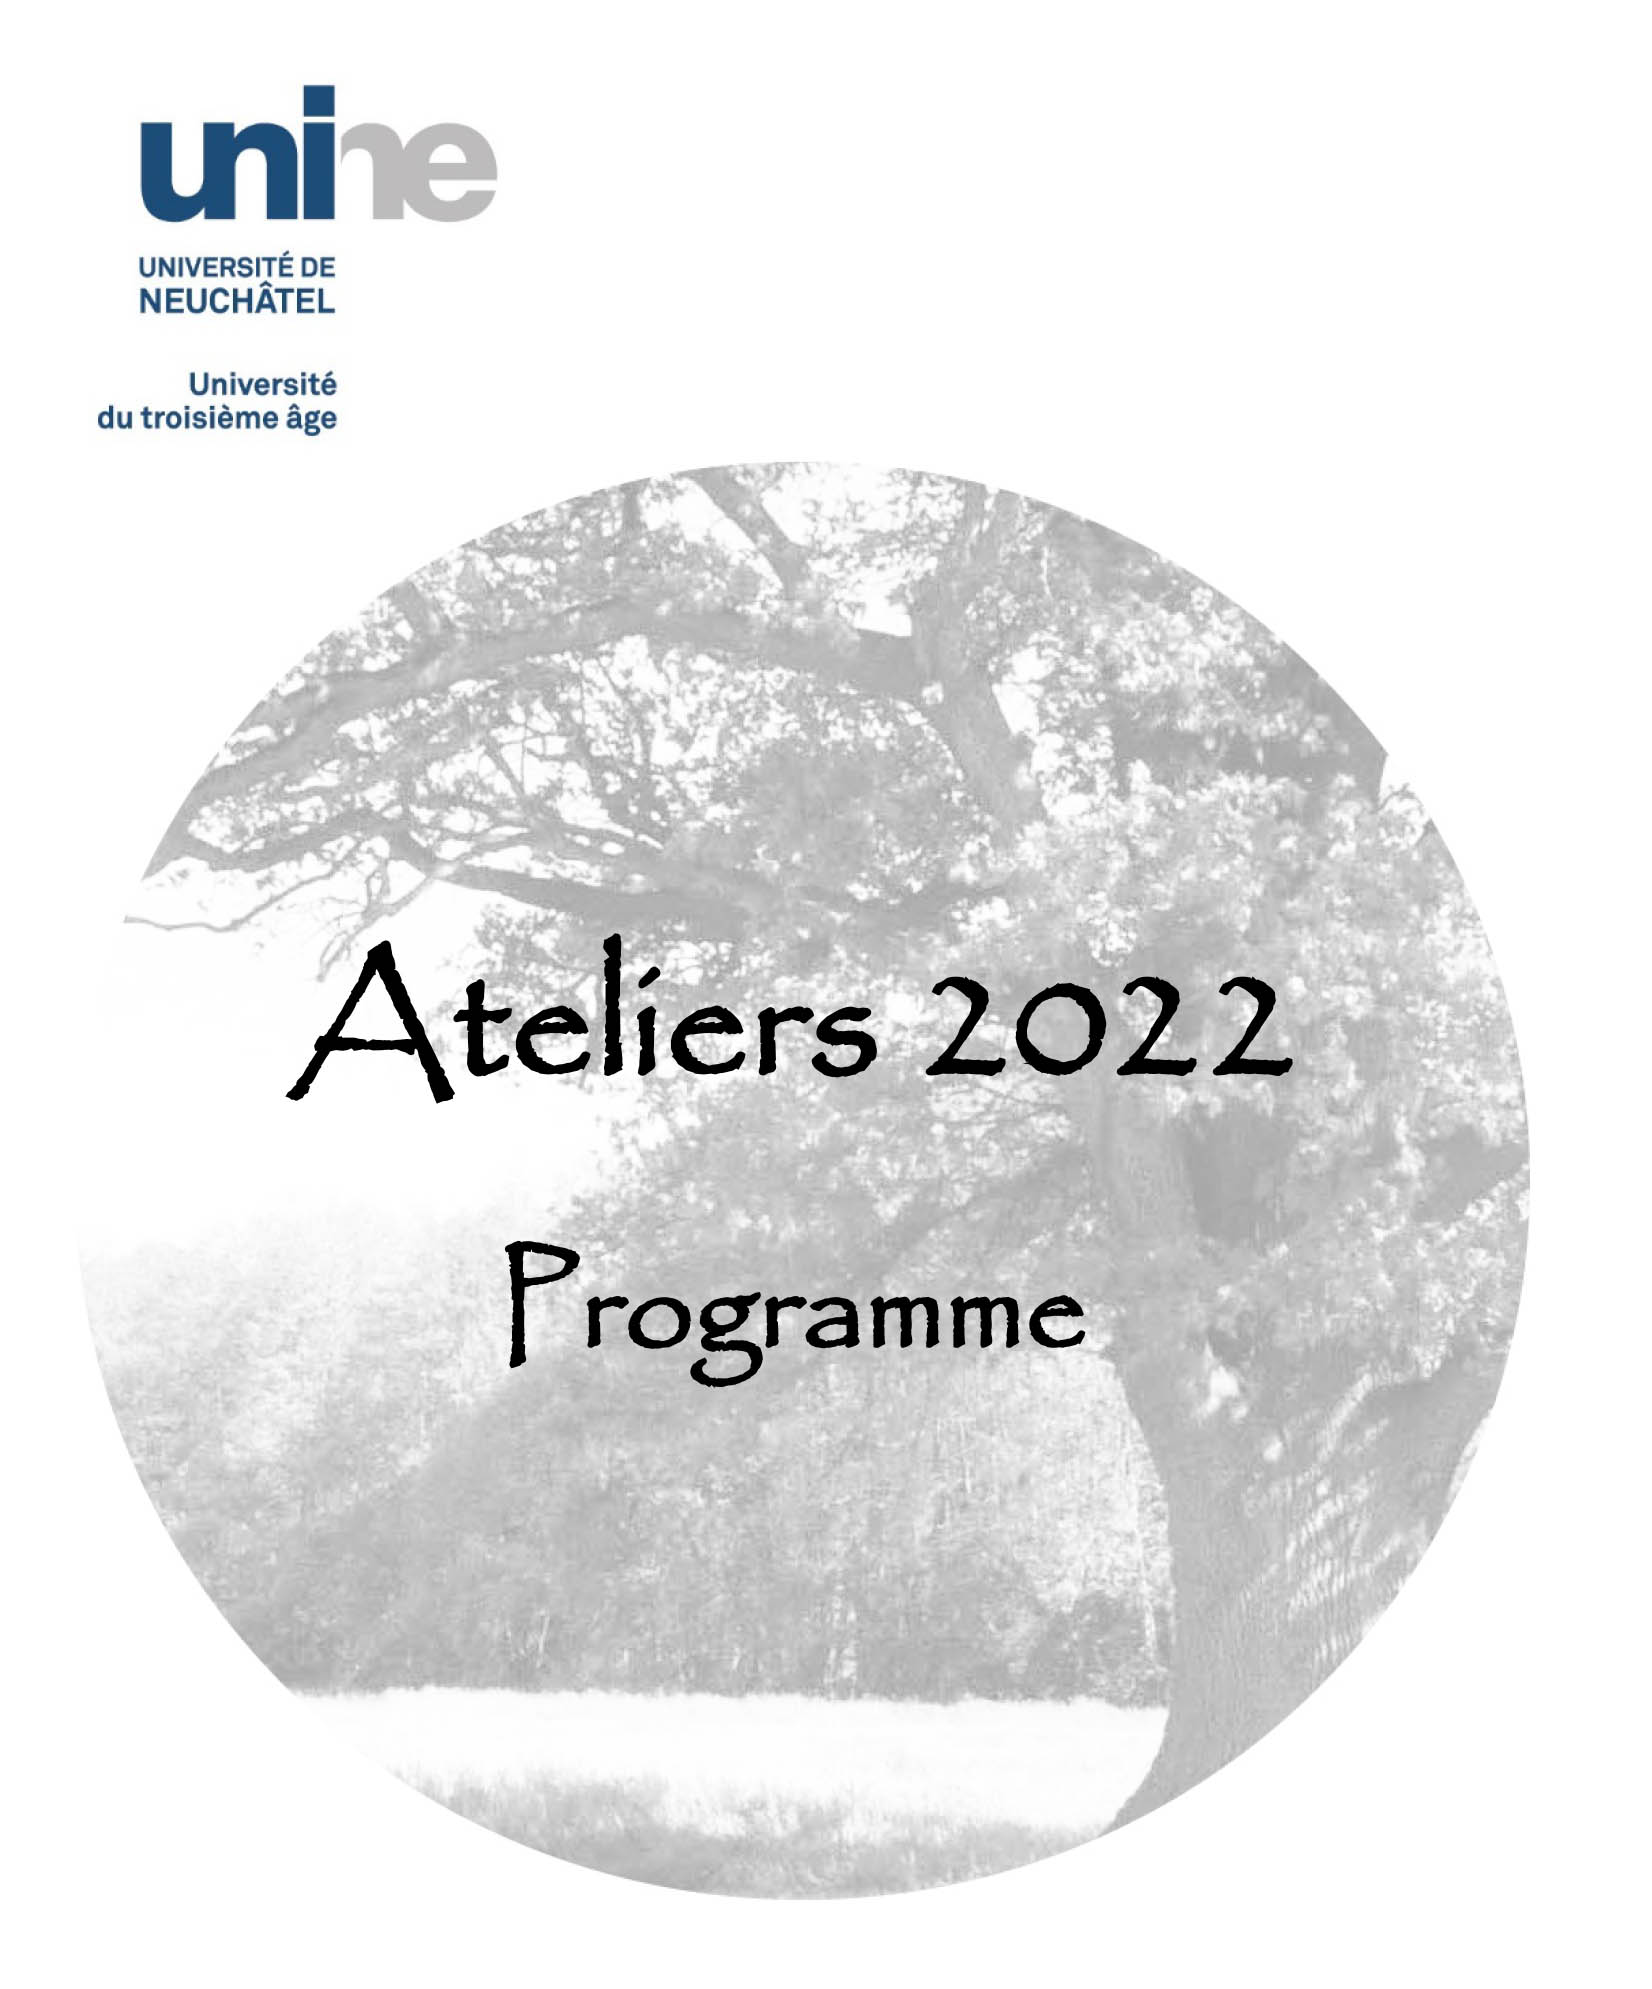 Ateliers 2022 couverture.jpg